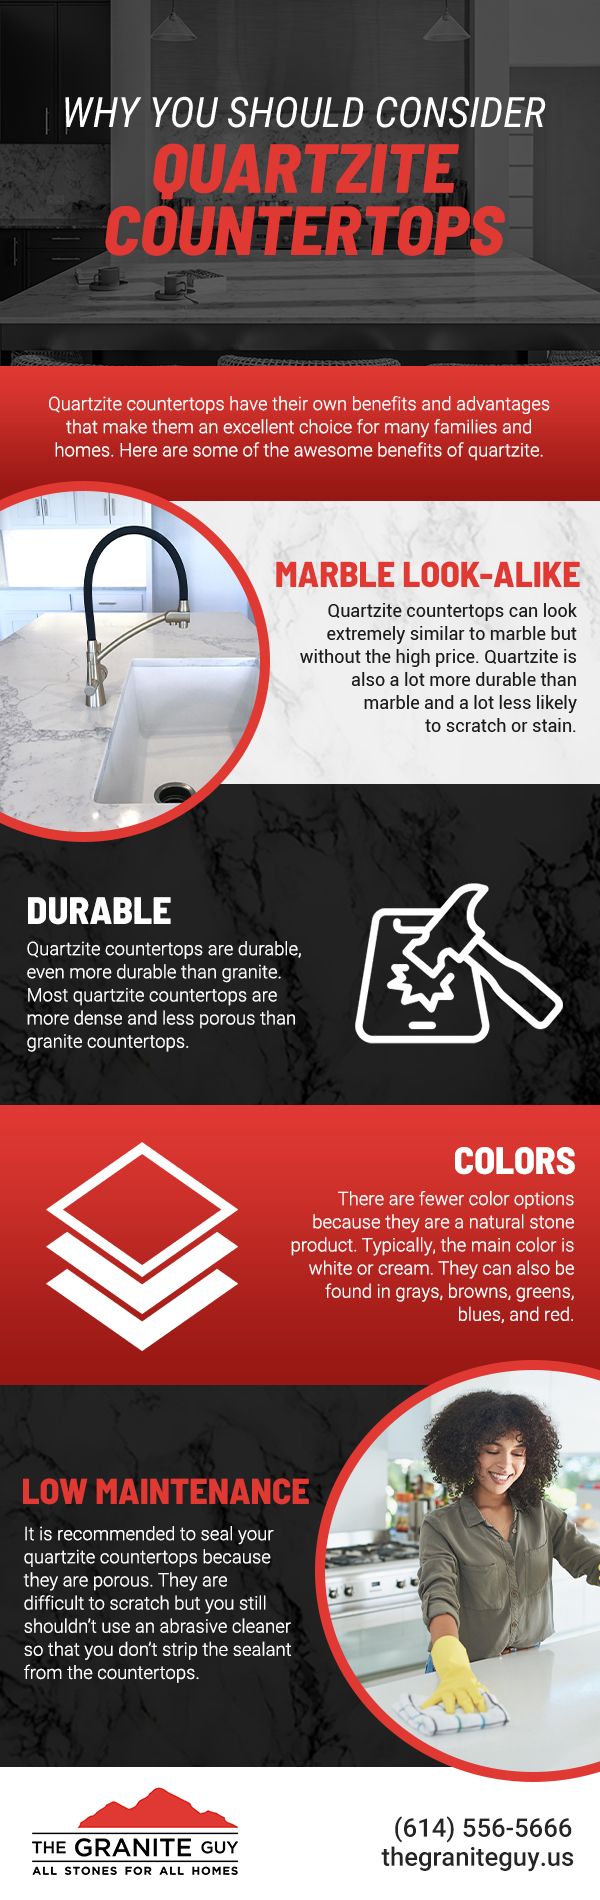 Why You Should Consider Quartzite Countertops [infographic]